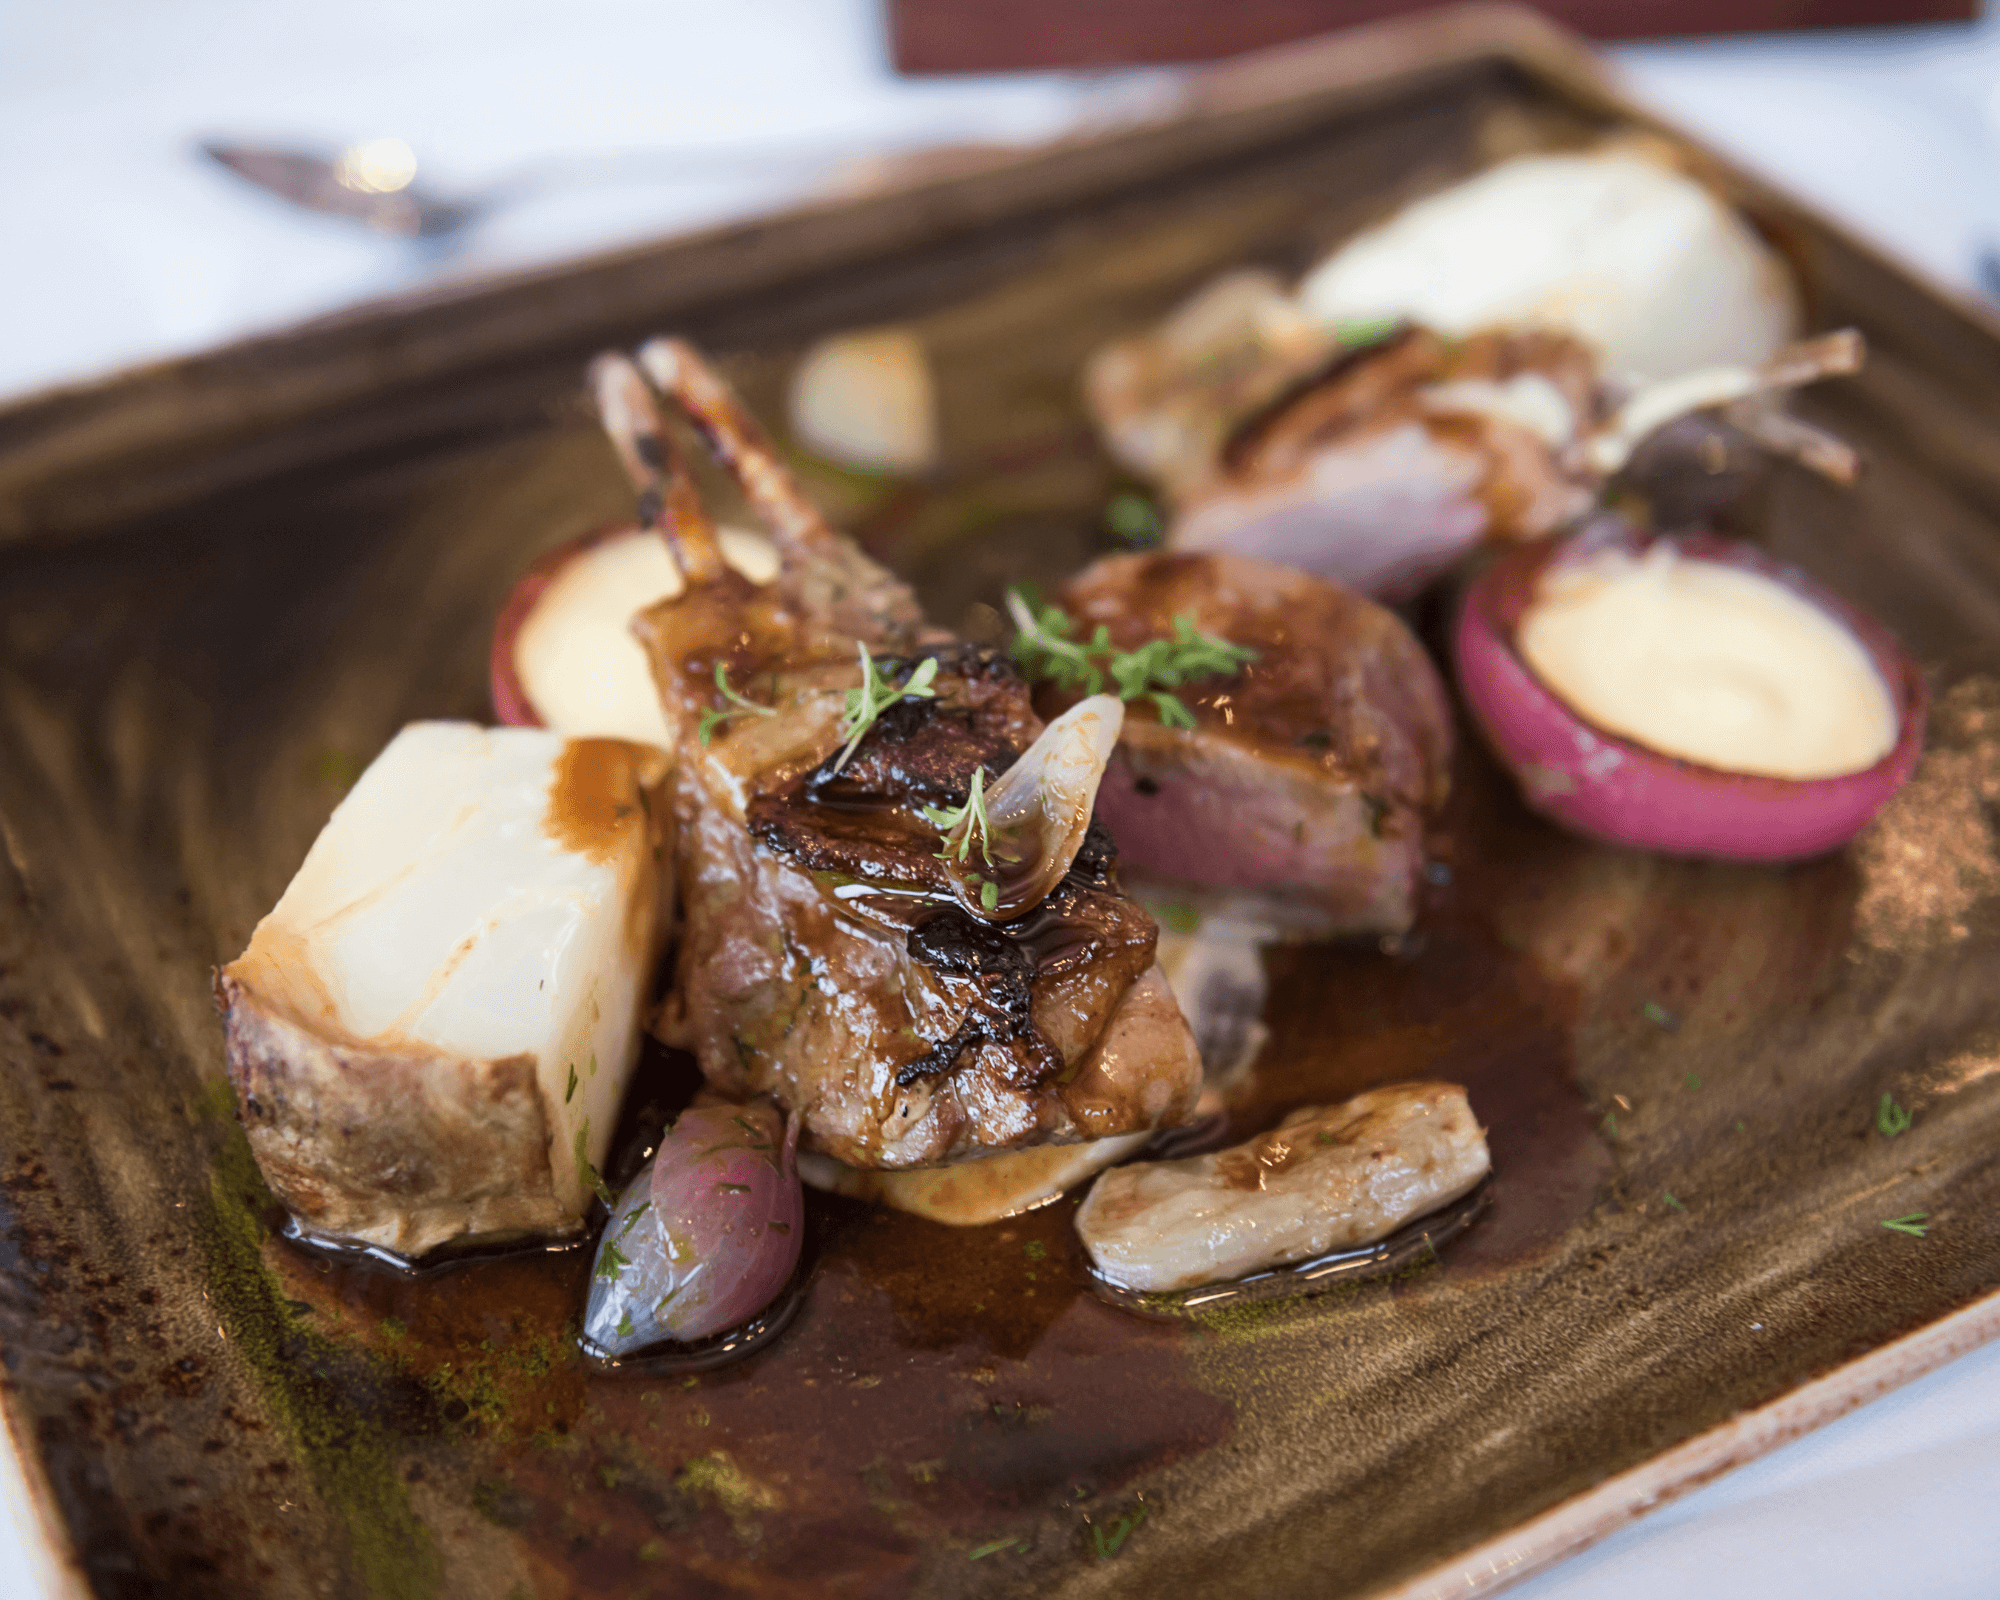 Icelandic Lamb, a typical food dish at a fine dining restaurant in Reykjavik 